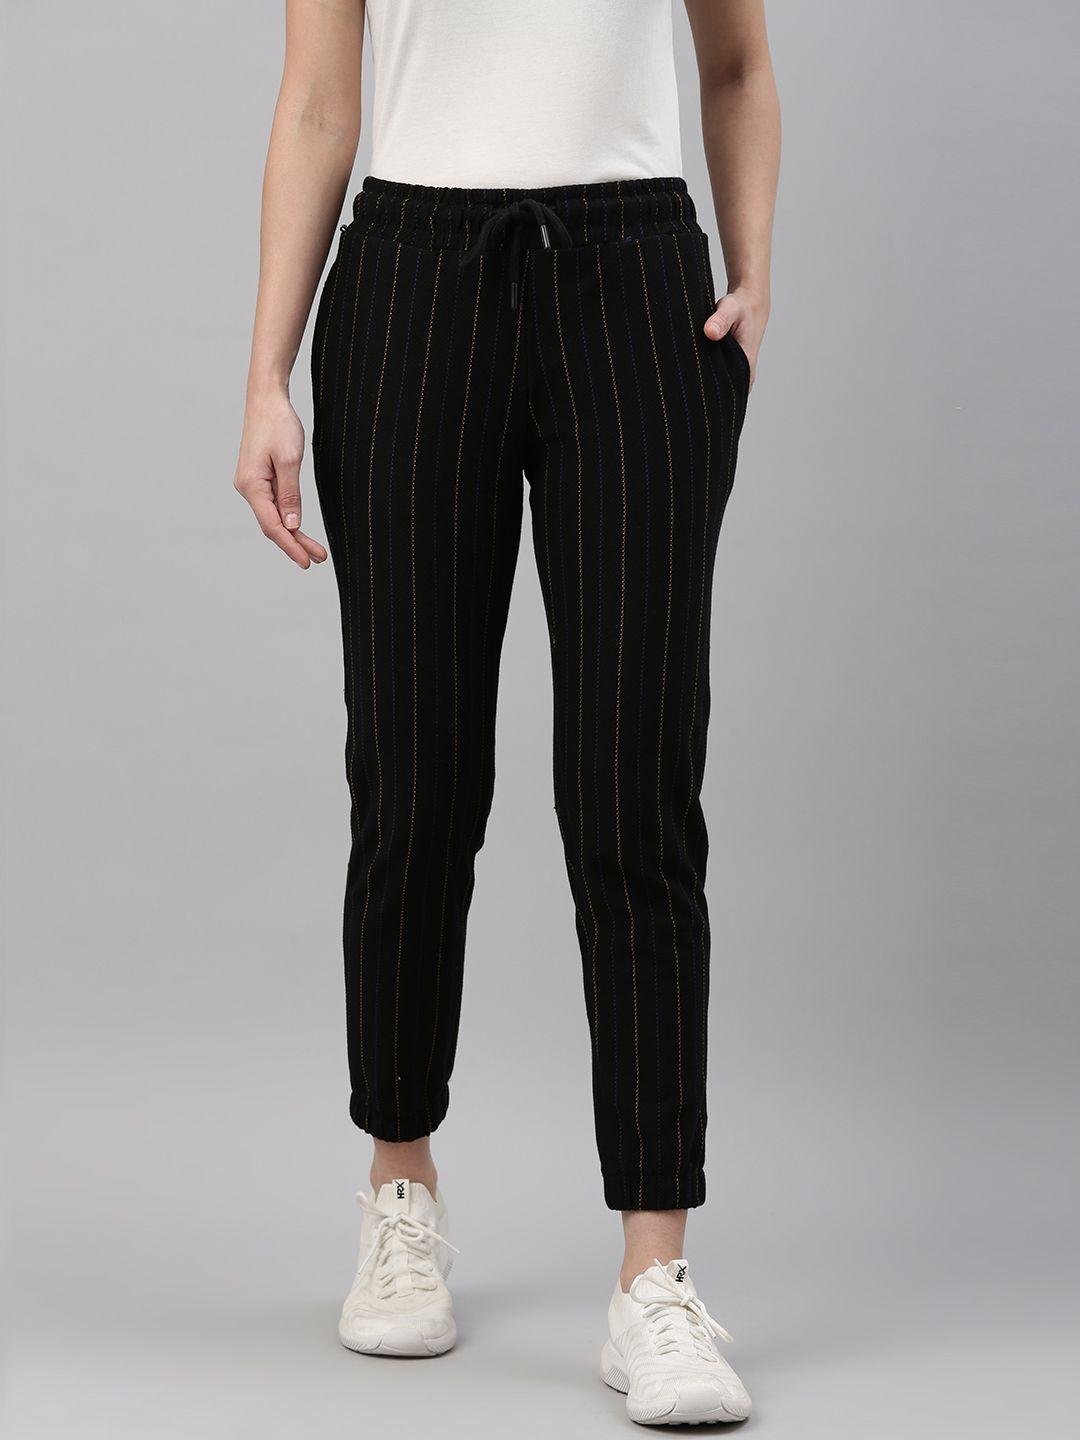 campus sutra women black & yellow striped cotton active joggers